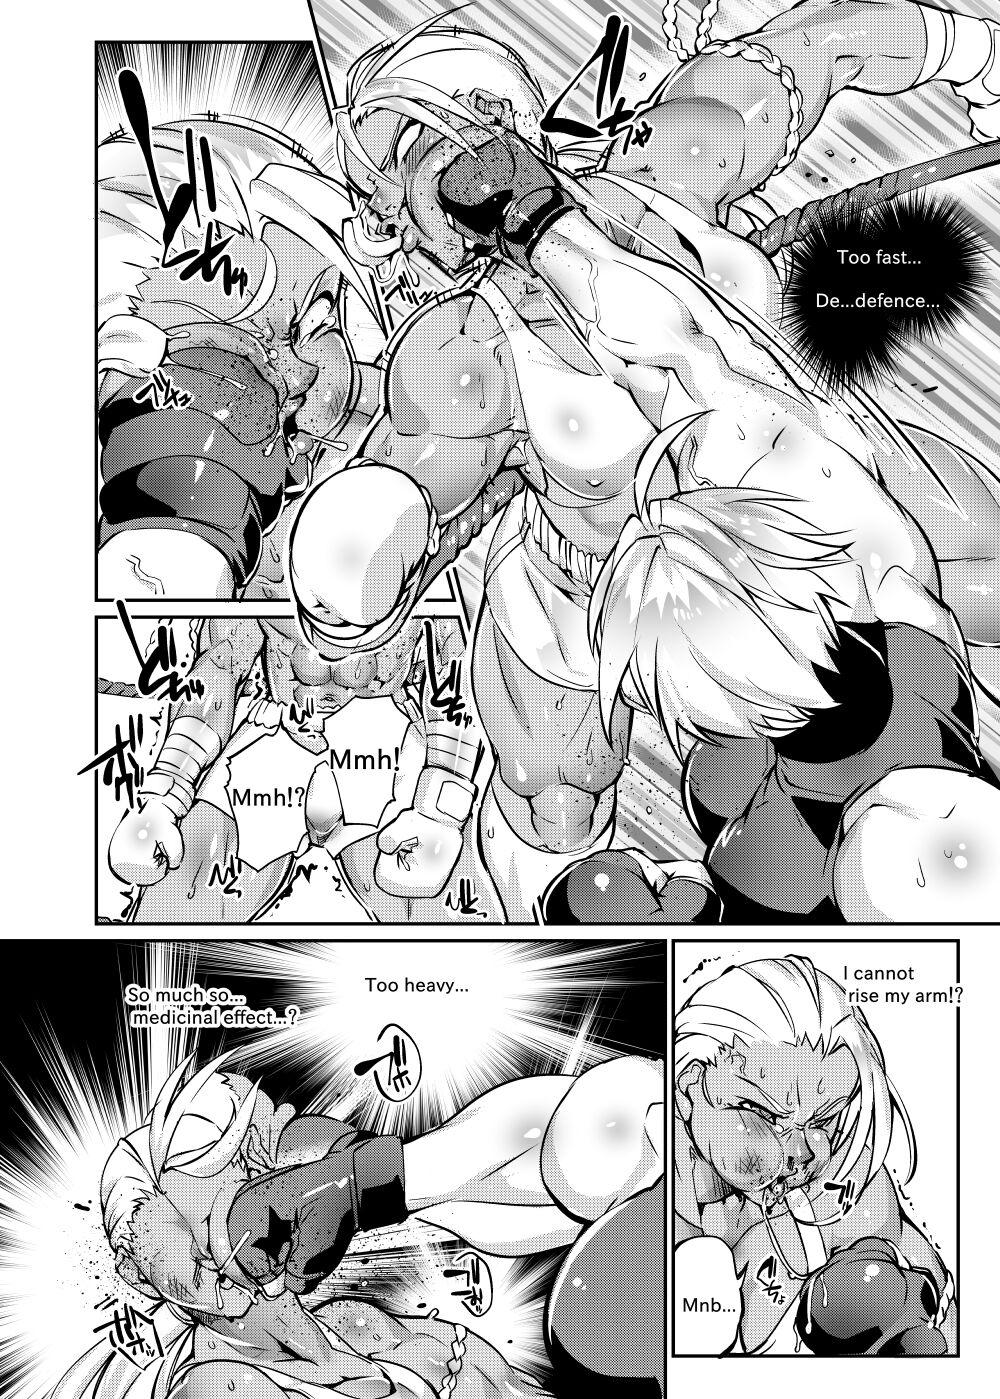 Old Vs Young Tougijou Rin - Arena Rin 5 - Original Dirty Talk - Page 9